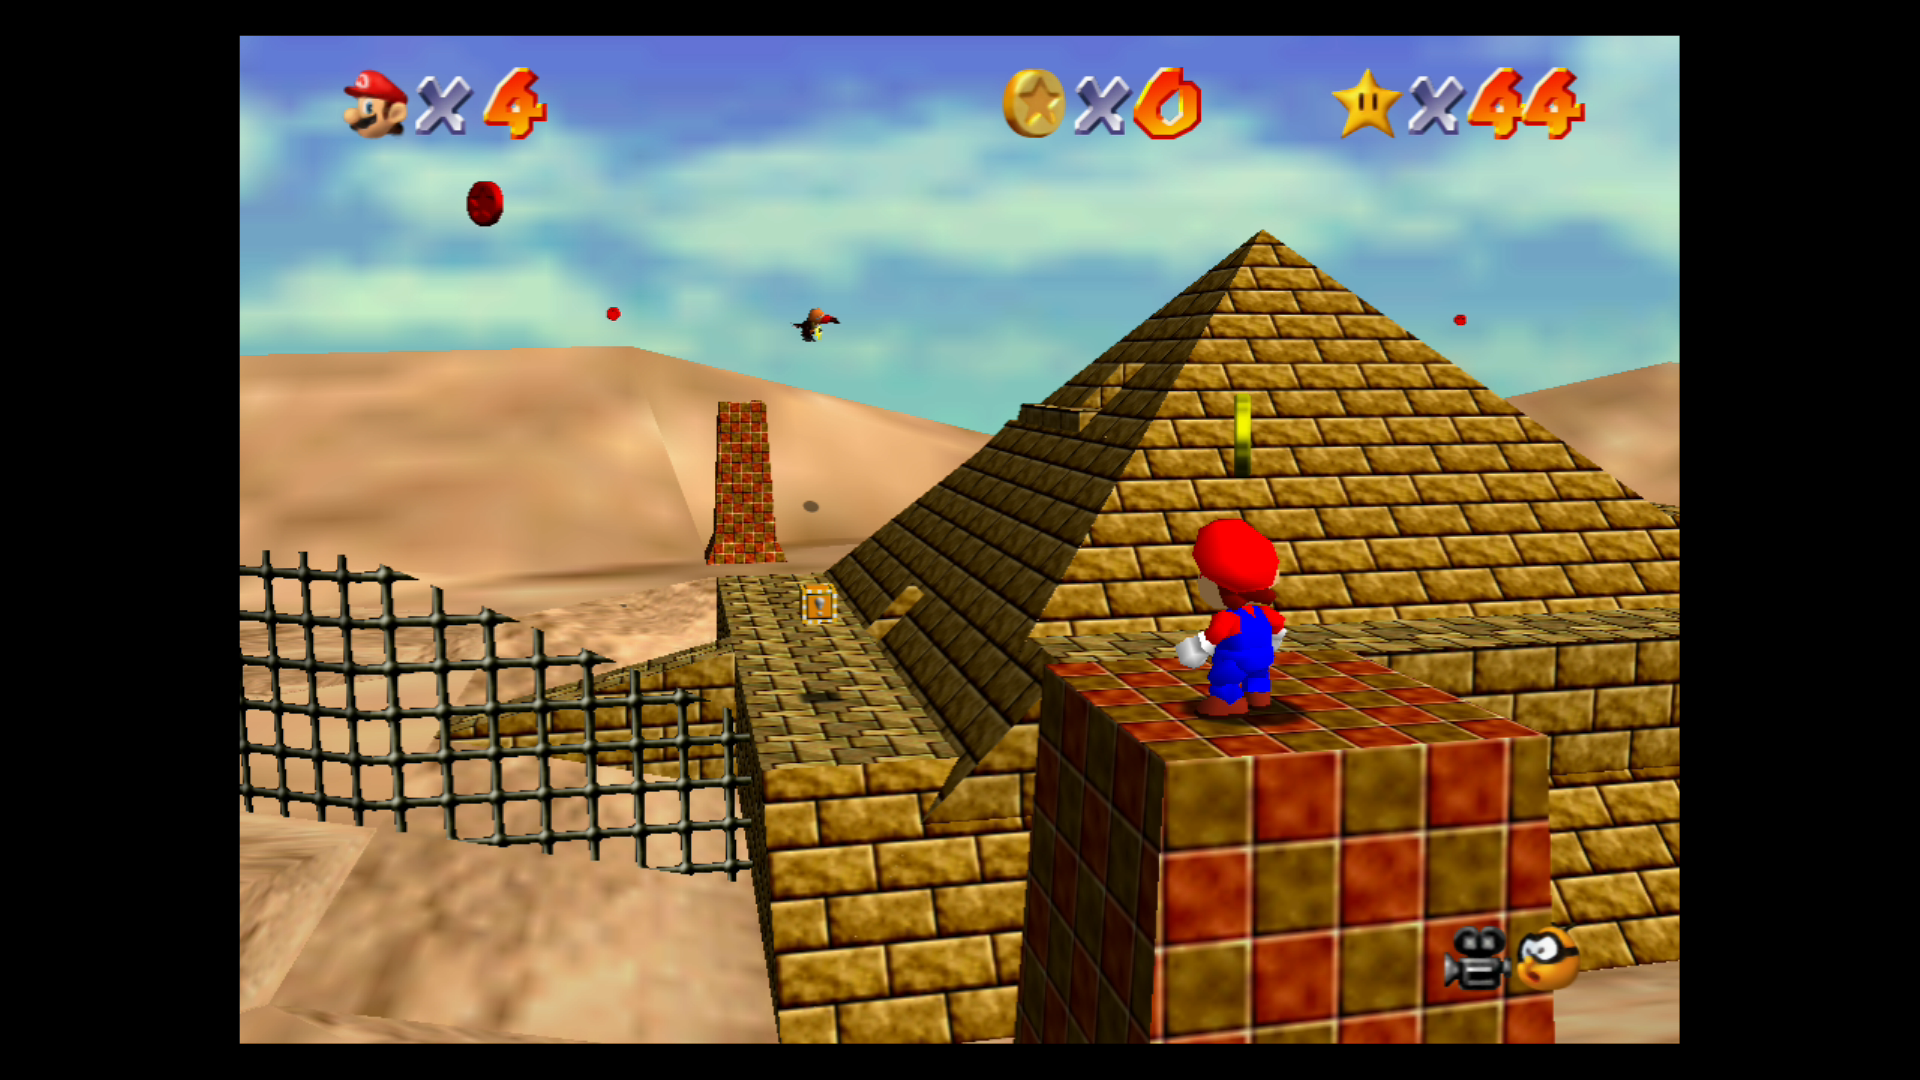 mario 64 free flying for 8 red coins